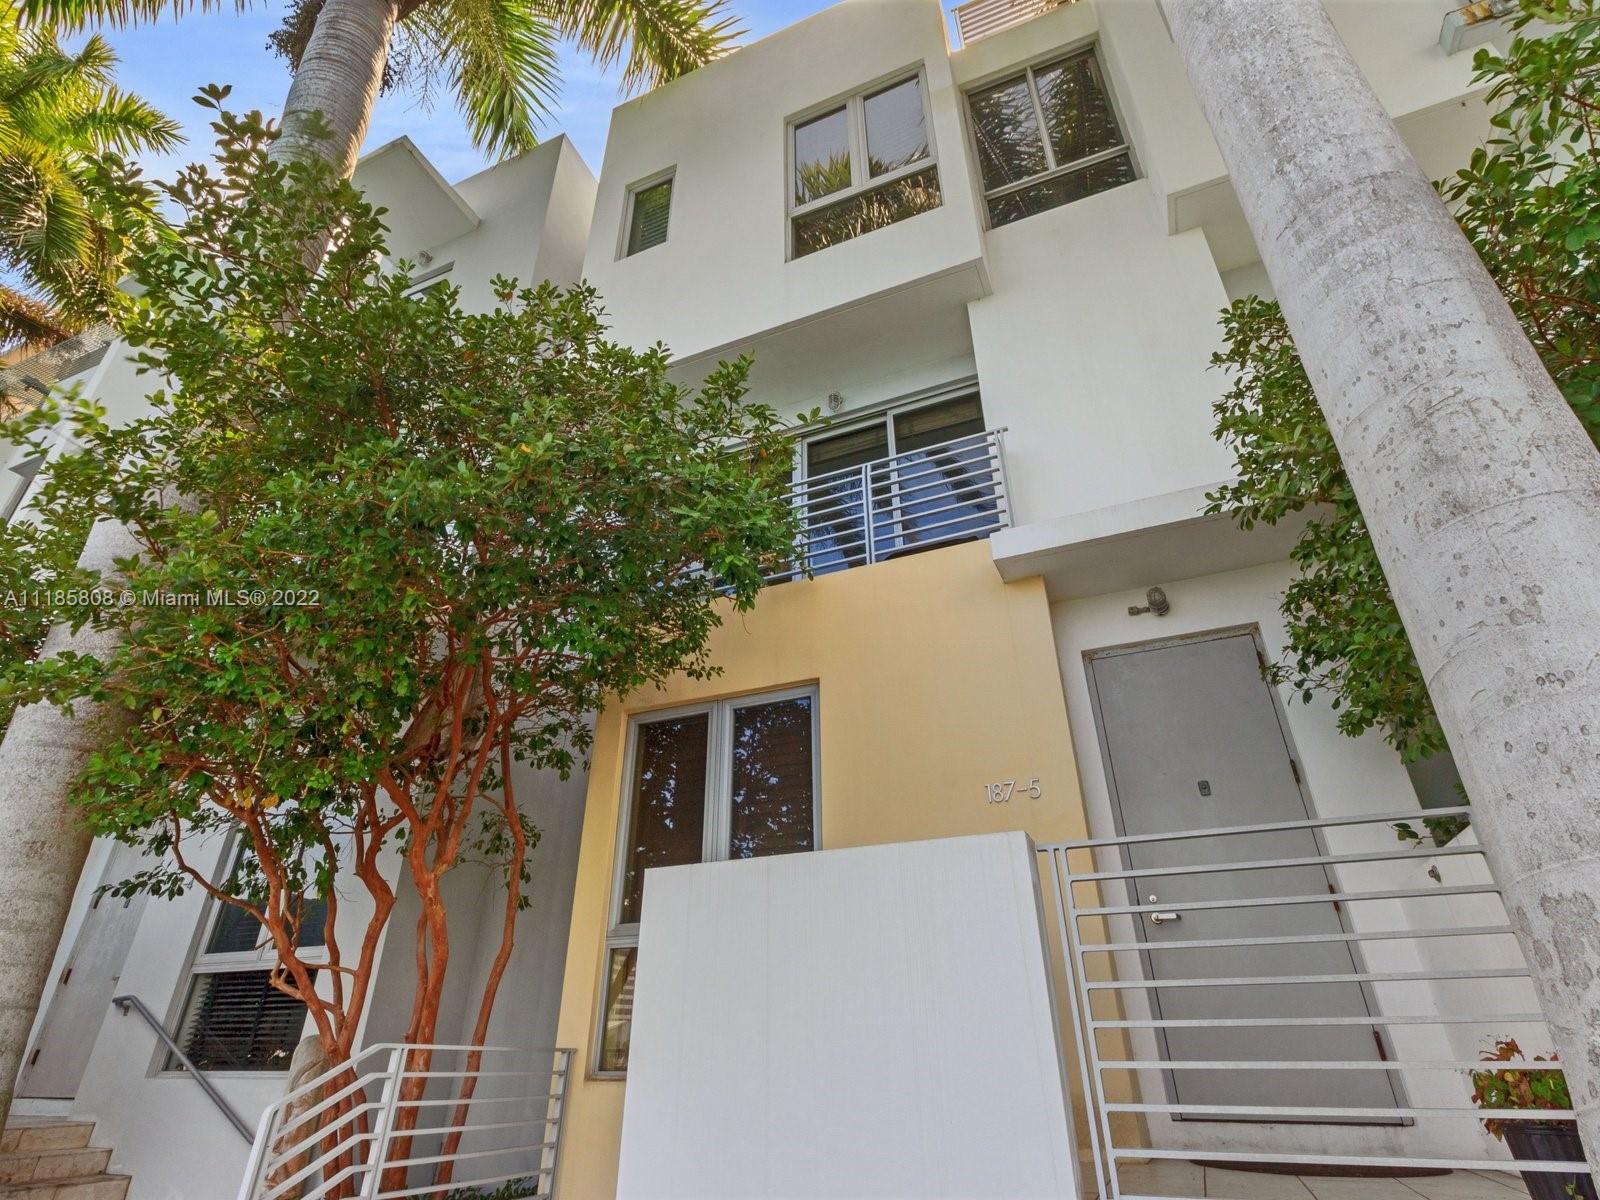 Gorgeous 3 bed, 3 1/2 bath, 4-story townhouse w/2 rooftop decks (1 w/built-in granite kitchen overlooking bay-2nd w/views of golf course) plus 3 balconies, 2-car garage and deeded private dock for up to 27 foot boat. Unit has amazing water views! Kitchen features stainless appliances, granite counters & Italian cedar color wood cabinets. All bedrooms ensuite. 2 have walk in closets & all have built-ins. Plantation shutters in kitchen & bedrooms; living area has wood blinds. Property features a water front pool, + tennis, playground and golf across the street. These units are rarely available.